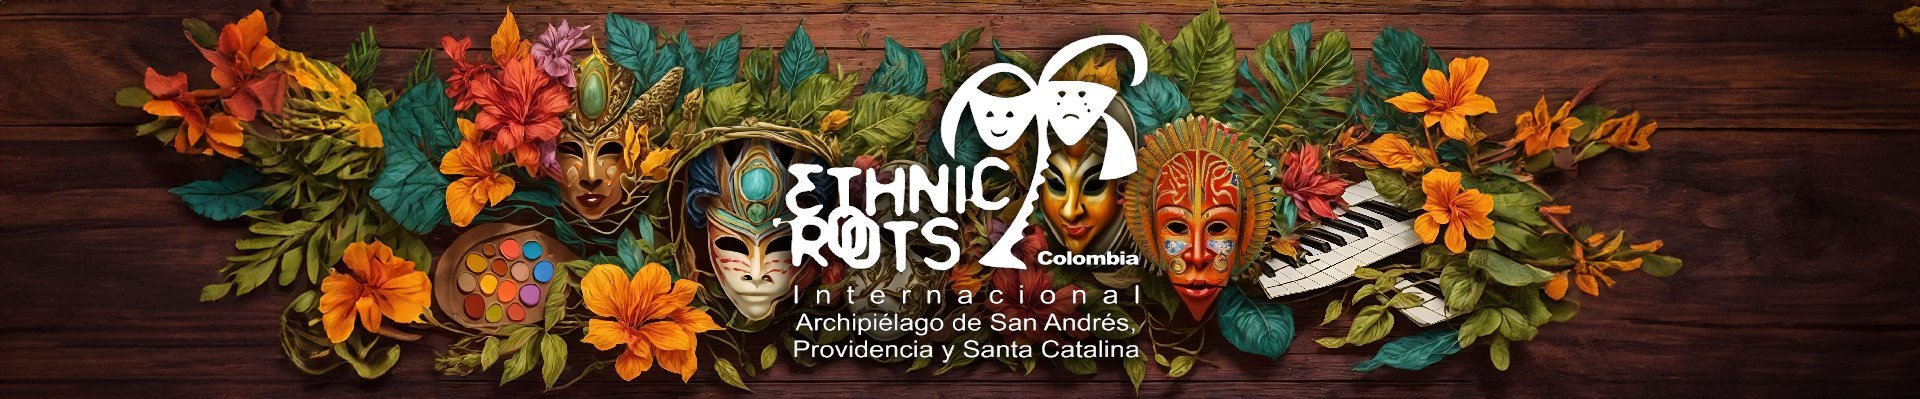 ethnic roots banner